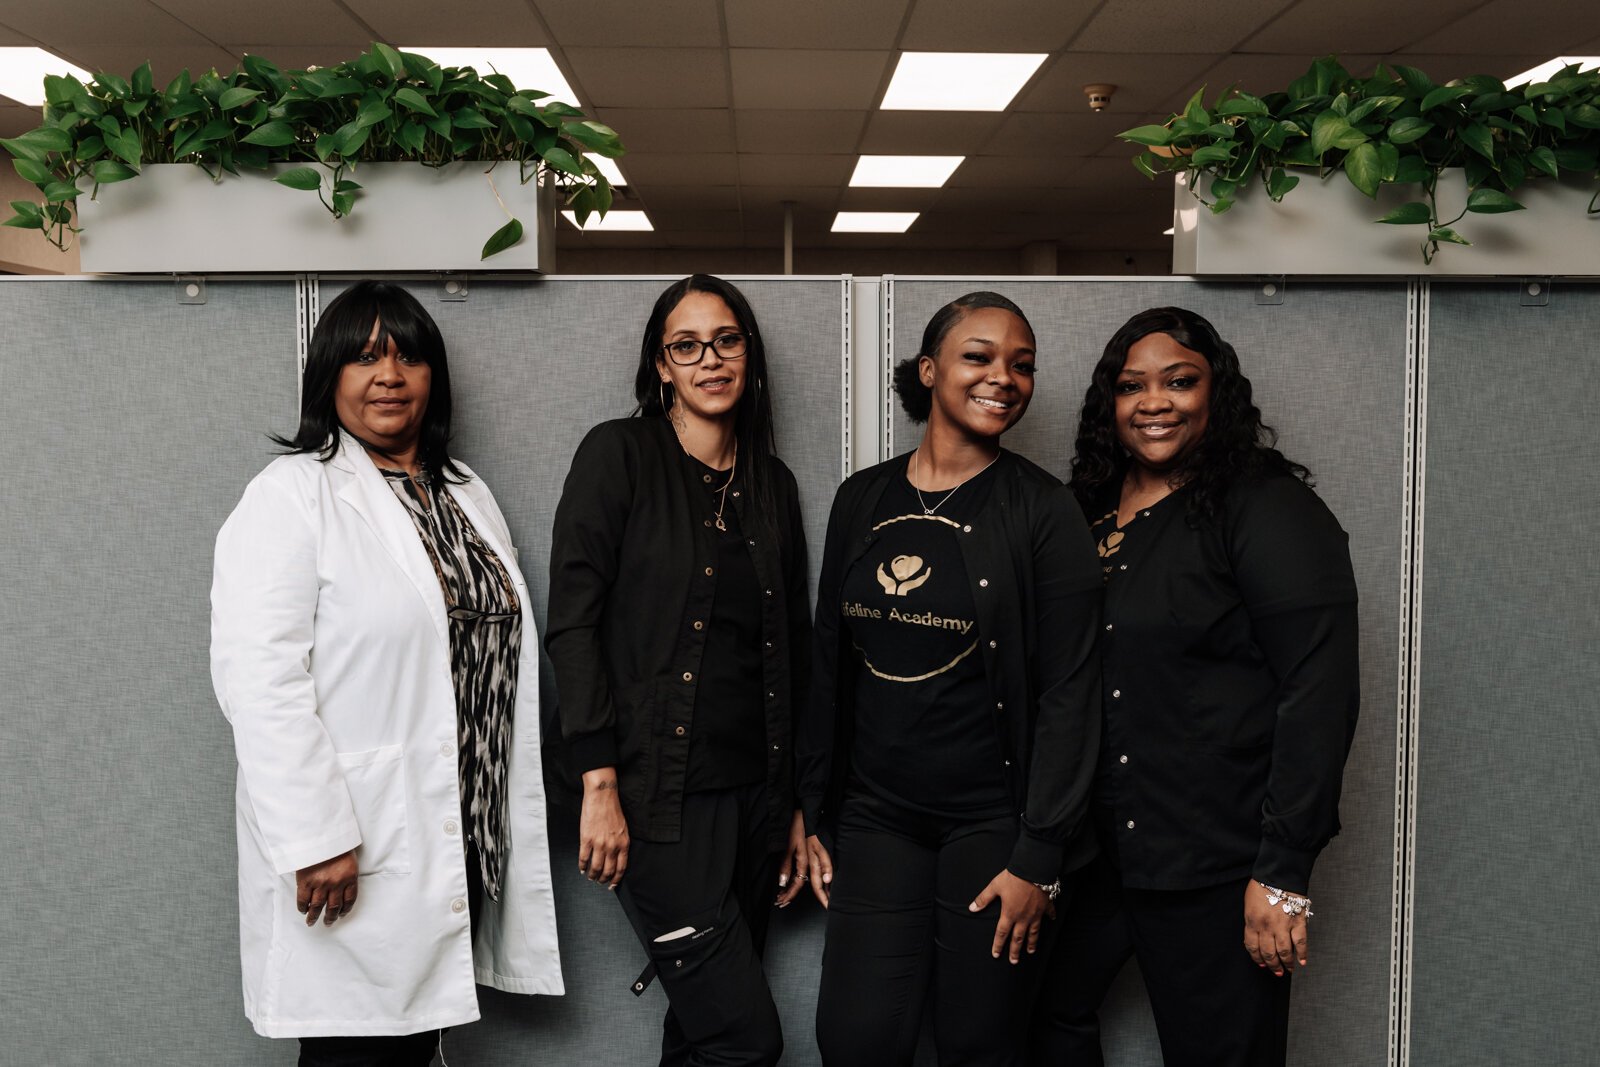 From left: Portrait of RN Instructor Queen Williams, student Mollie Niles, student Ja'Lona Franklin and SeAndra Robinson RN CEO at Lifeline Academy.